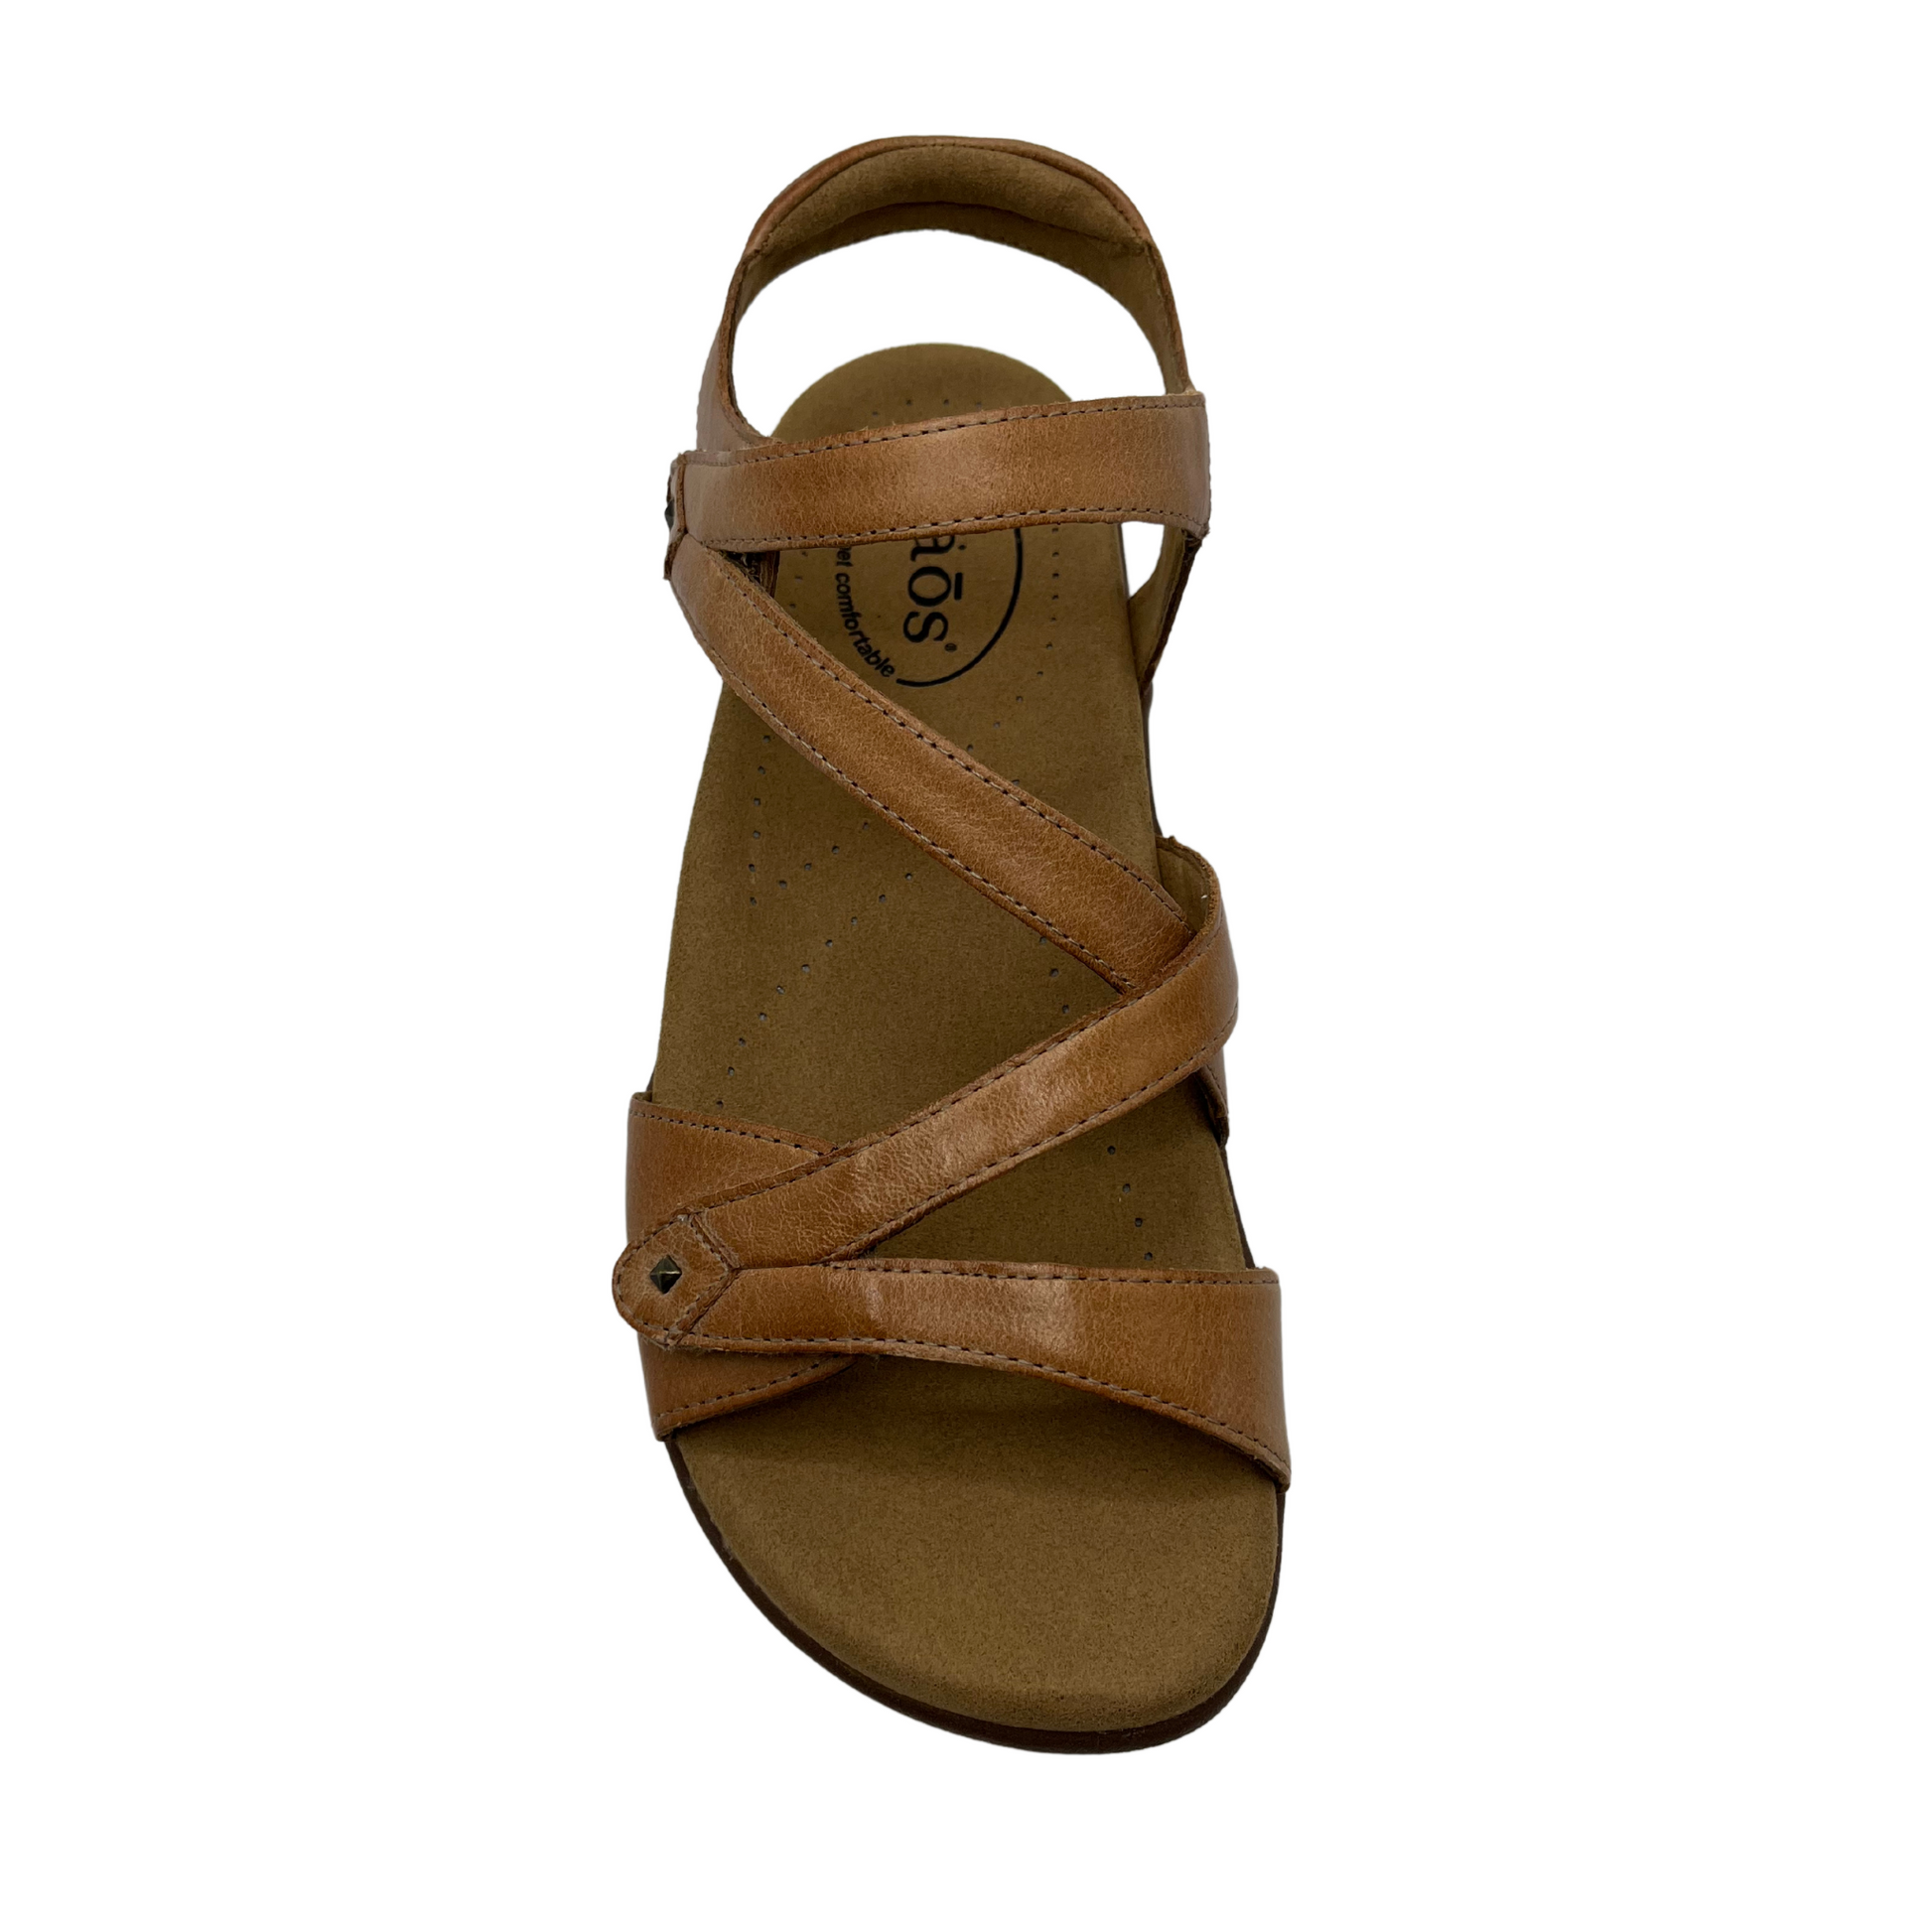 Top view of brown leather sandal with anatomical footbed, adjustable velcro straps and open toe